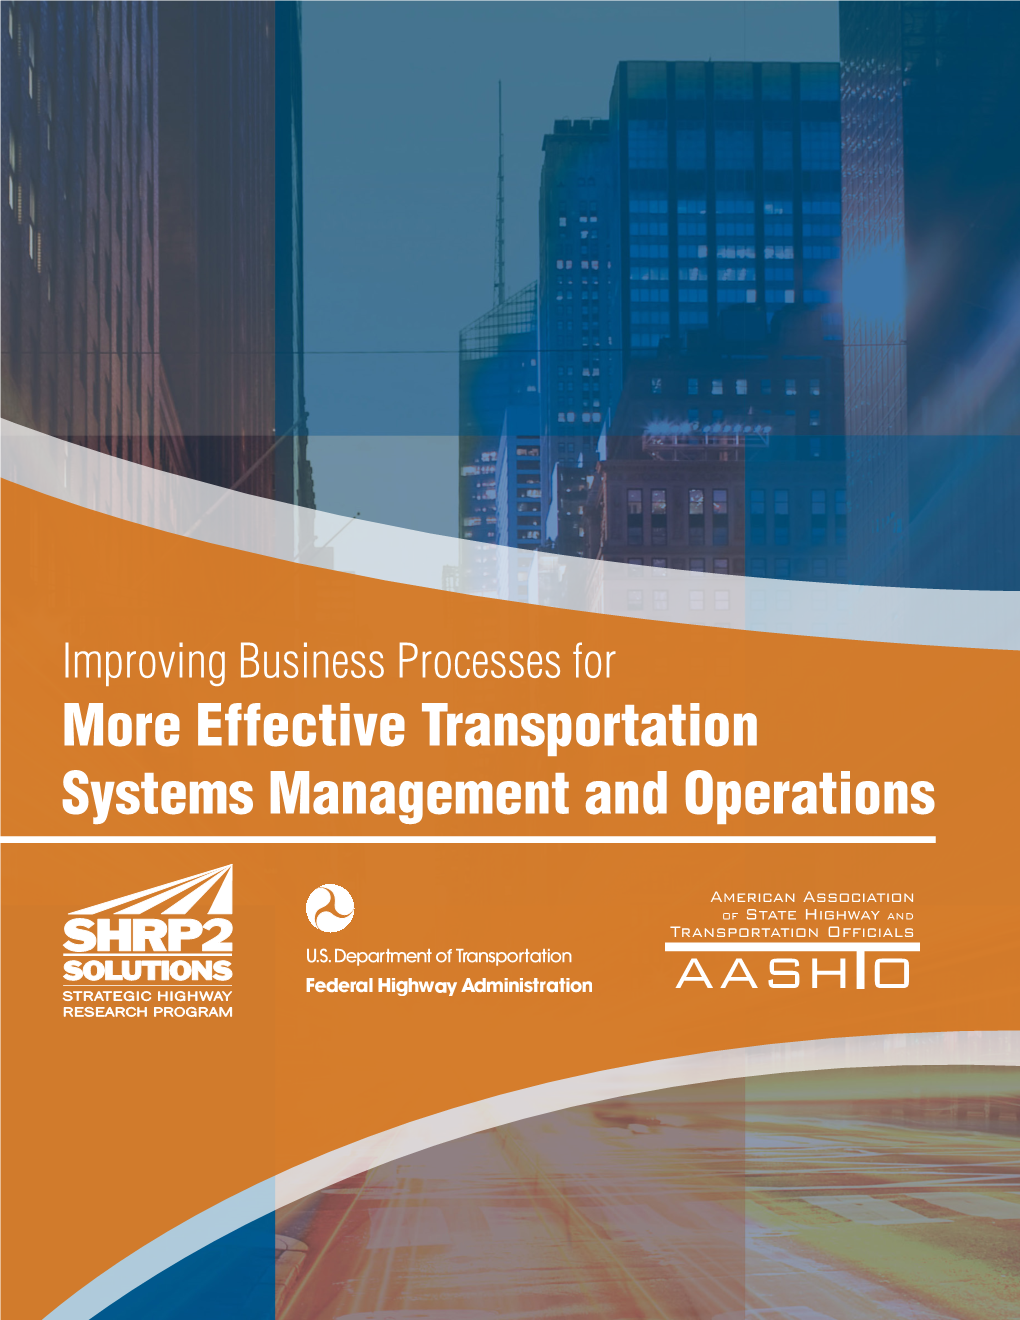 Improving Business Processes for More Effective Transportation Systems Management and Operations